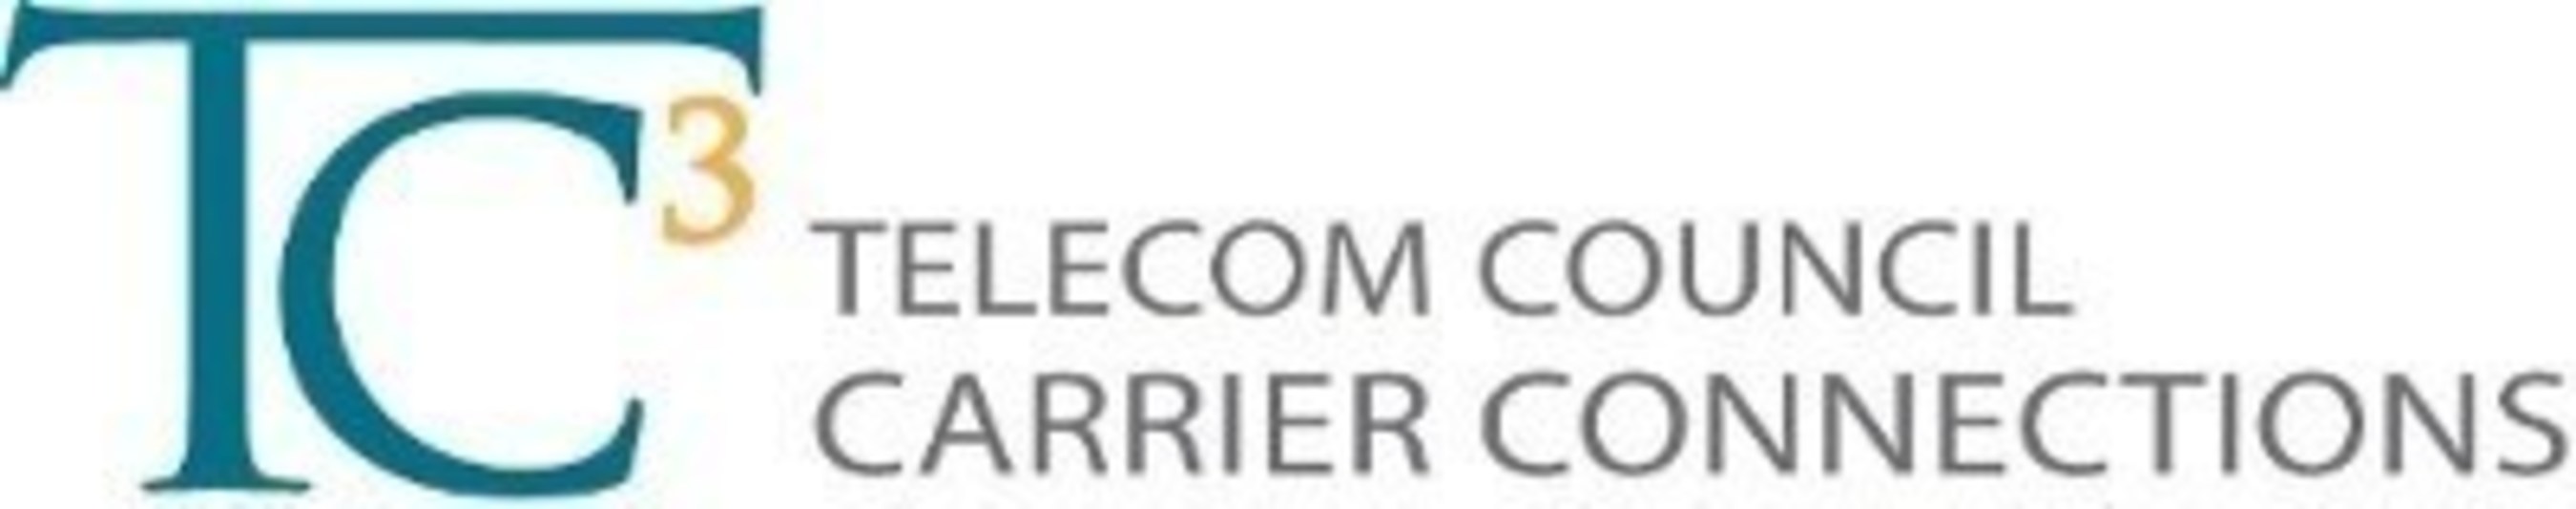 The Telecom Council of Silicon Valley is hosting TC3 (Telecom Council Carrier Connections), September 28 - 29 at the Computer History Museum in Mountain View, Calif.